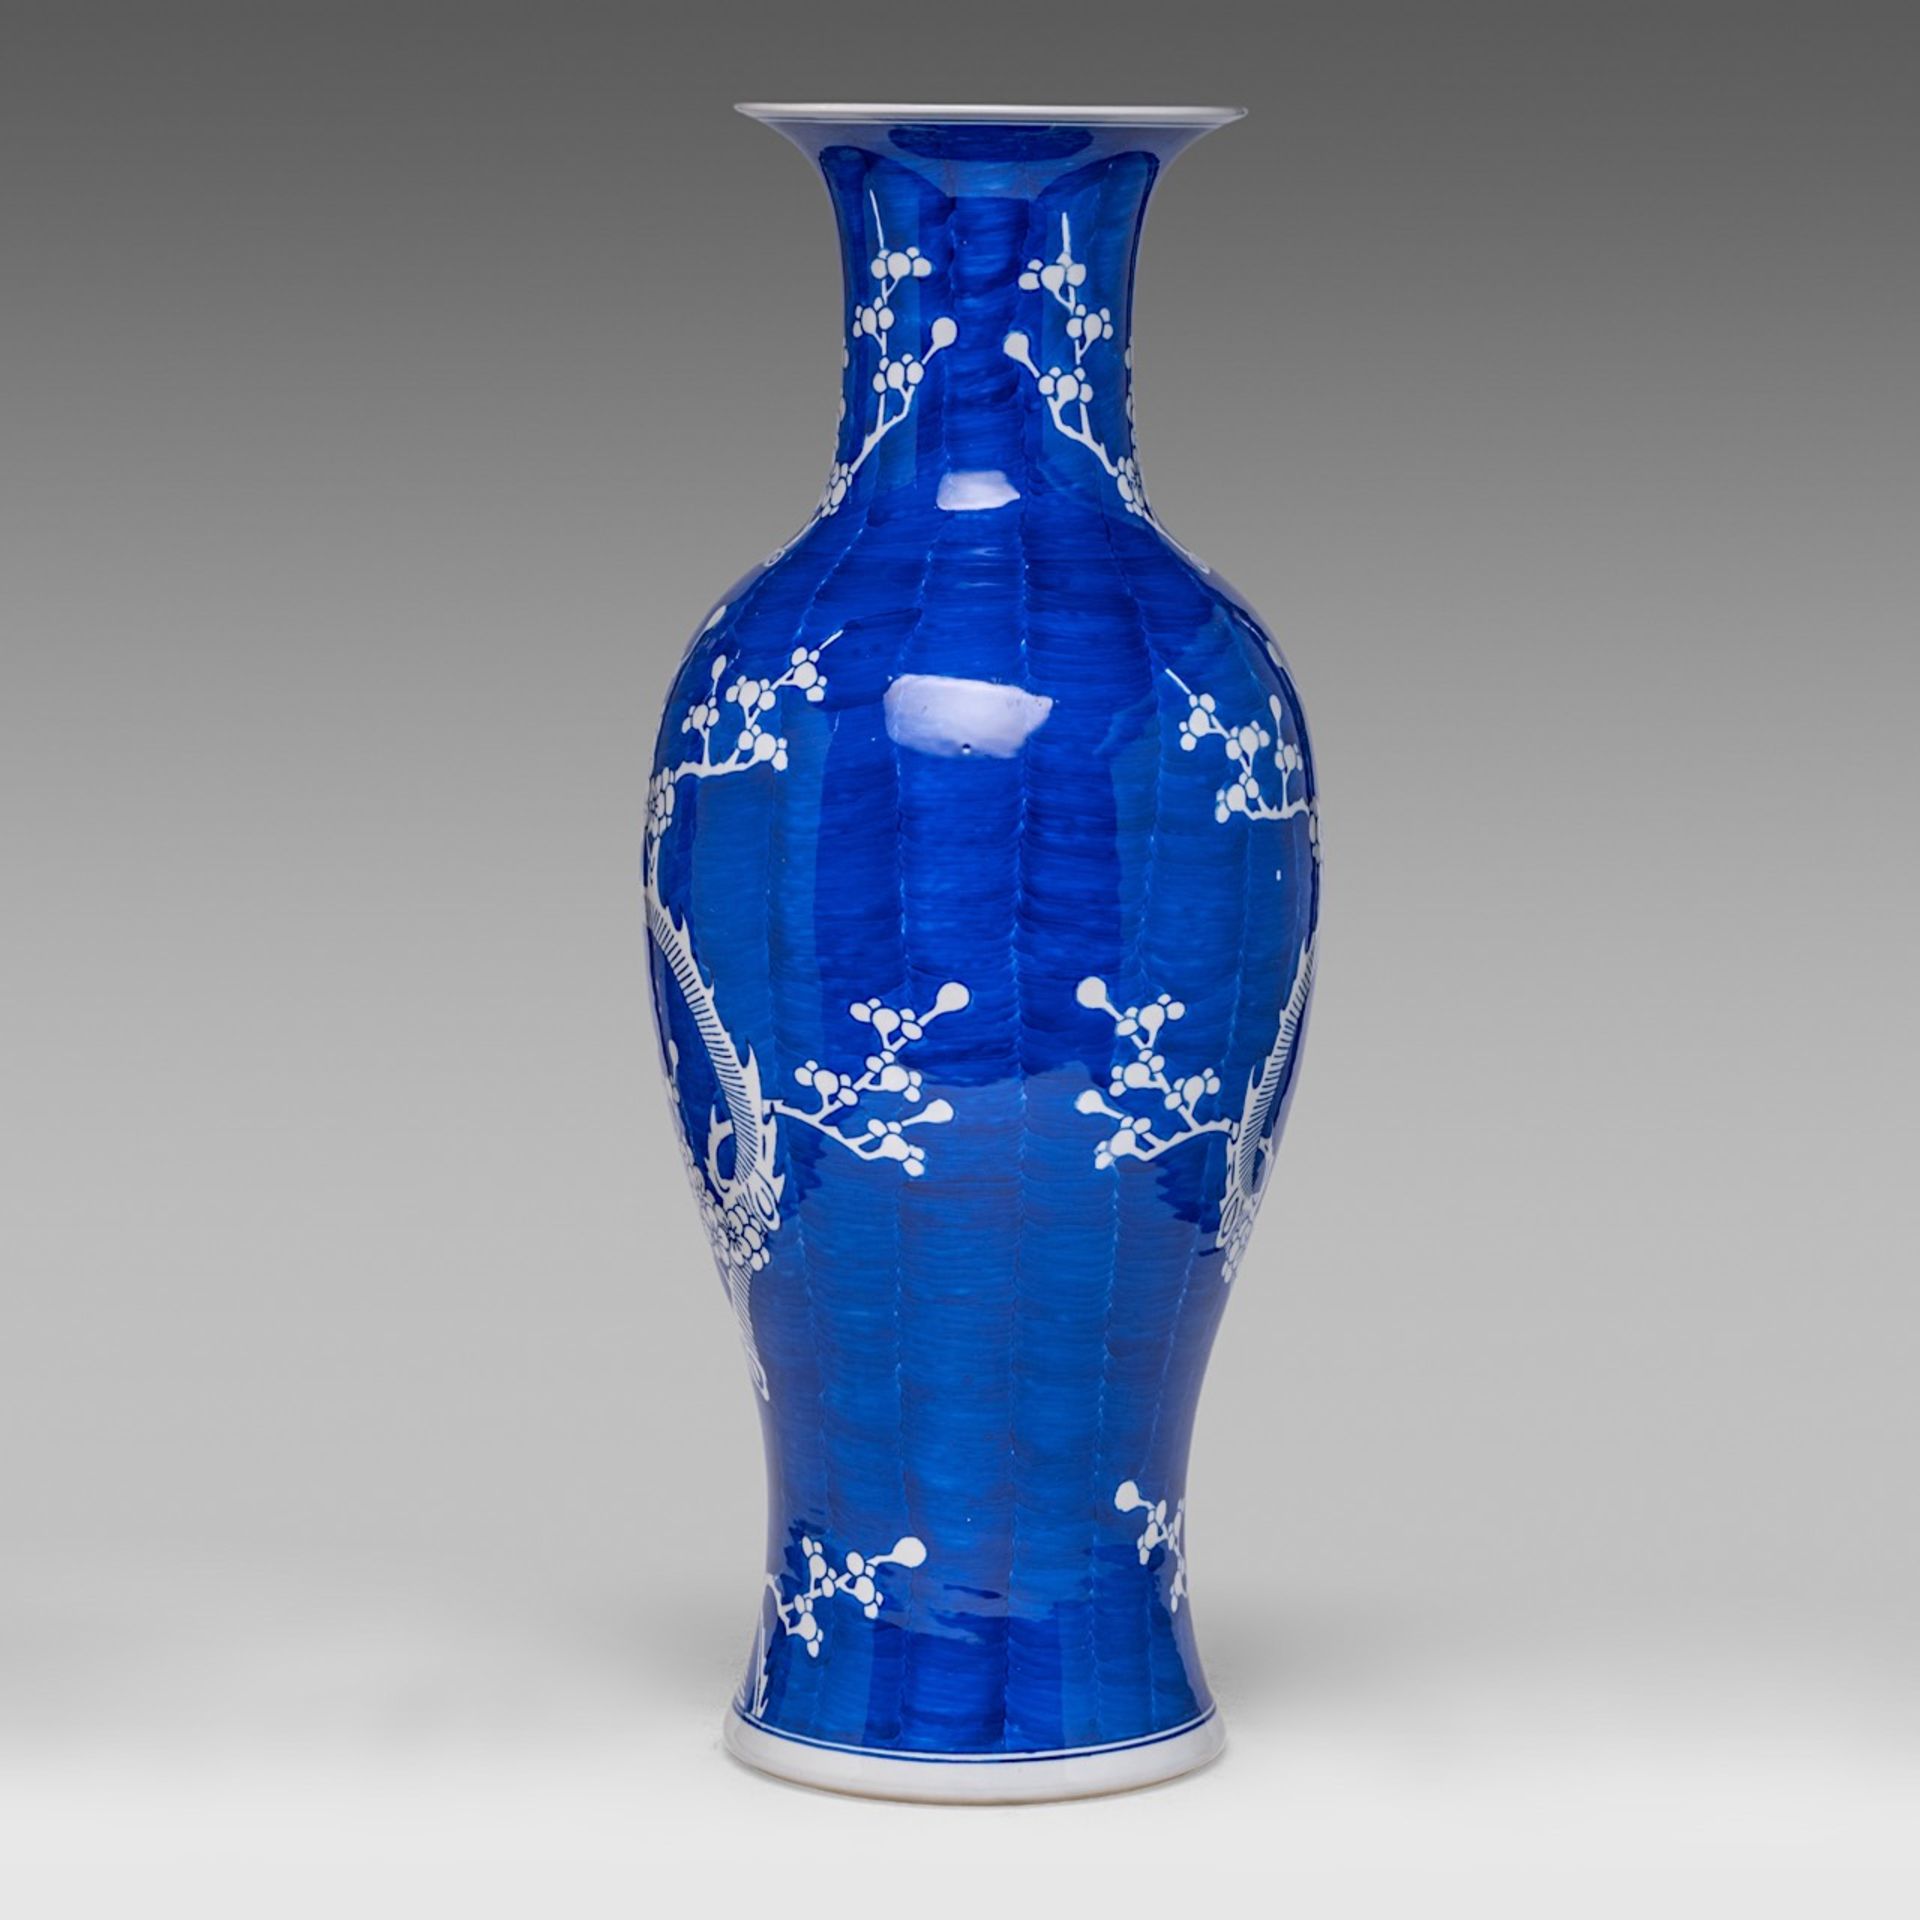 A Chinese blue and white 'Prunus on cracked ice' baluster vase, 20thC, H 63,5 cm - Image 2 of 6